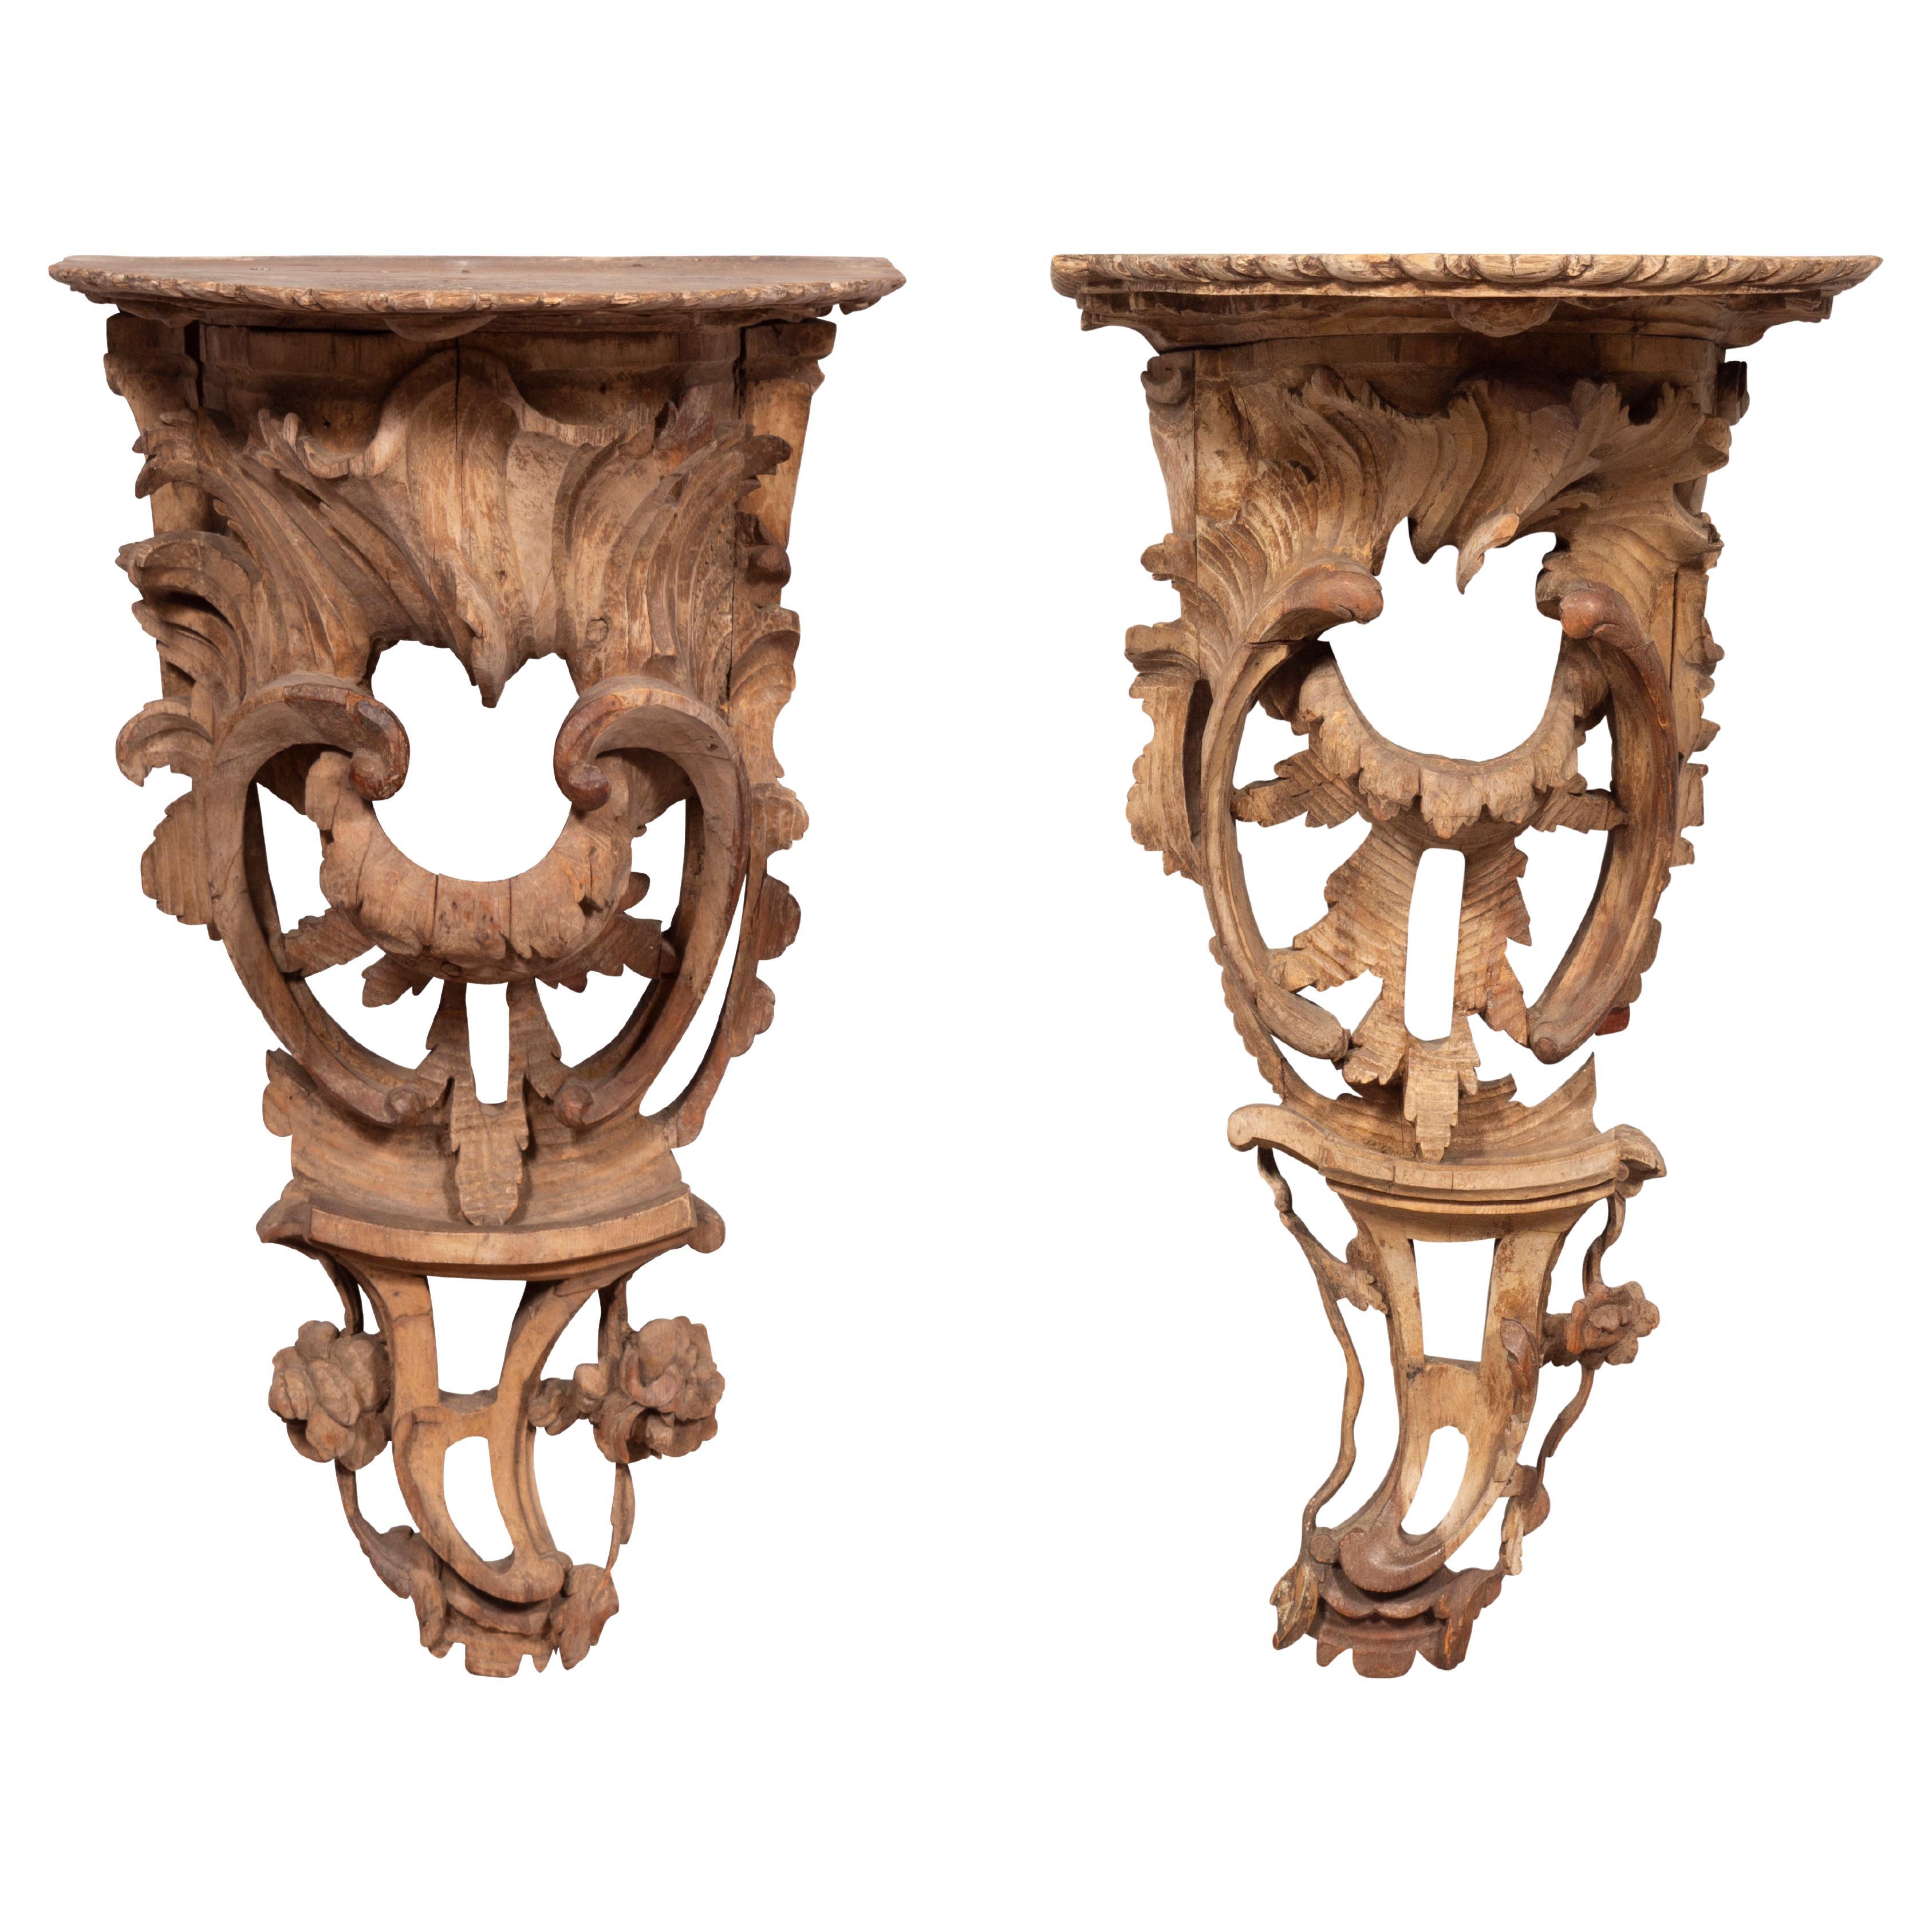 Originally gilded or painted. With a gadrooned edge to the demilune shaped shelf, the bracket with a rocaille carved shell and pierced scroll and flower head carving. From a Newport RI estate.